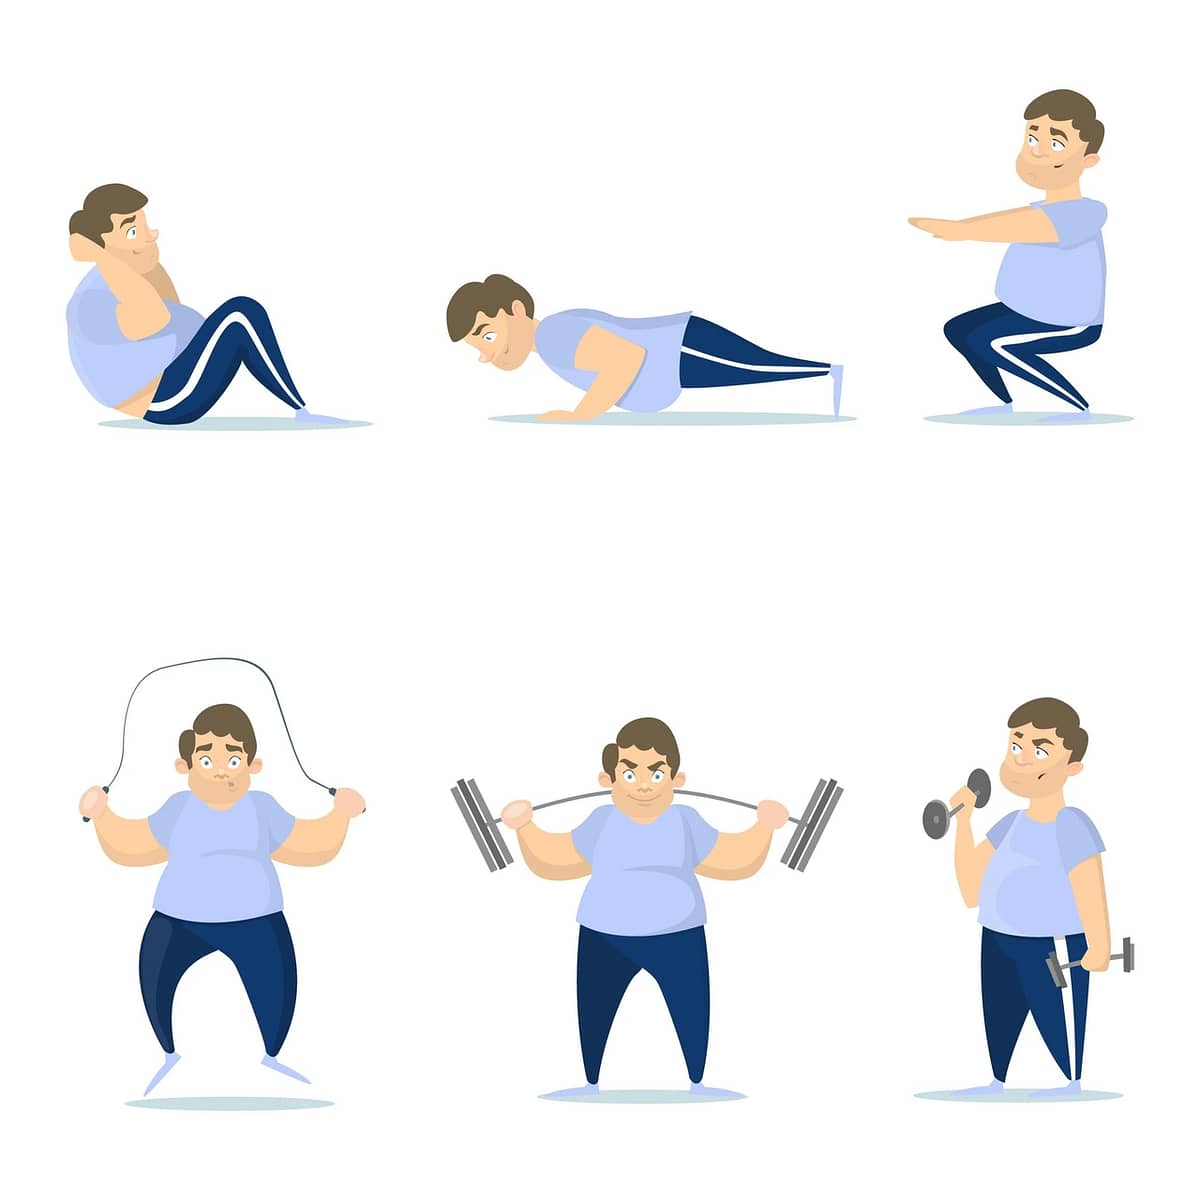 Fat man training set on white background. Jumping, squats and push ups - 4-week workout plan for weight loss male